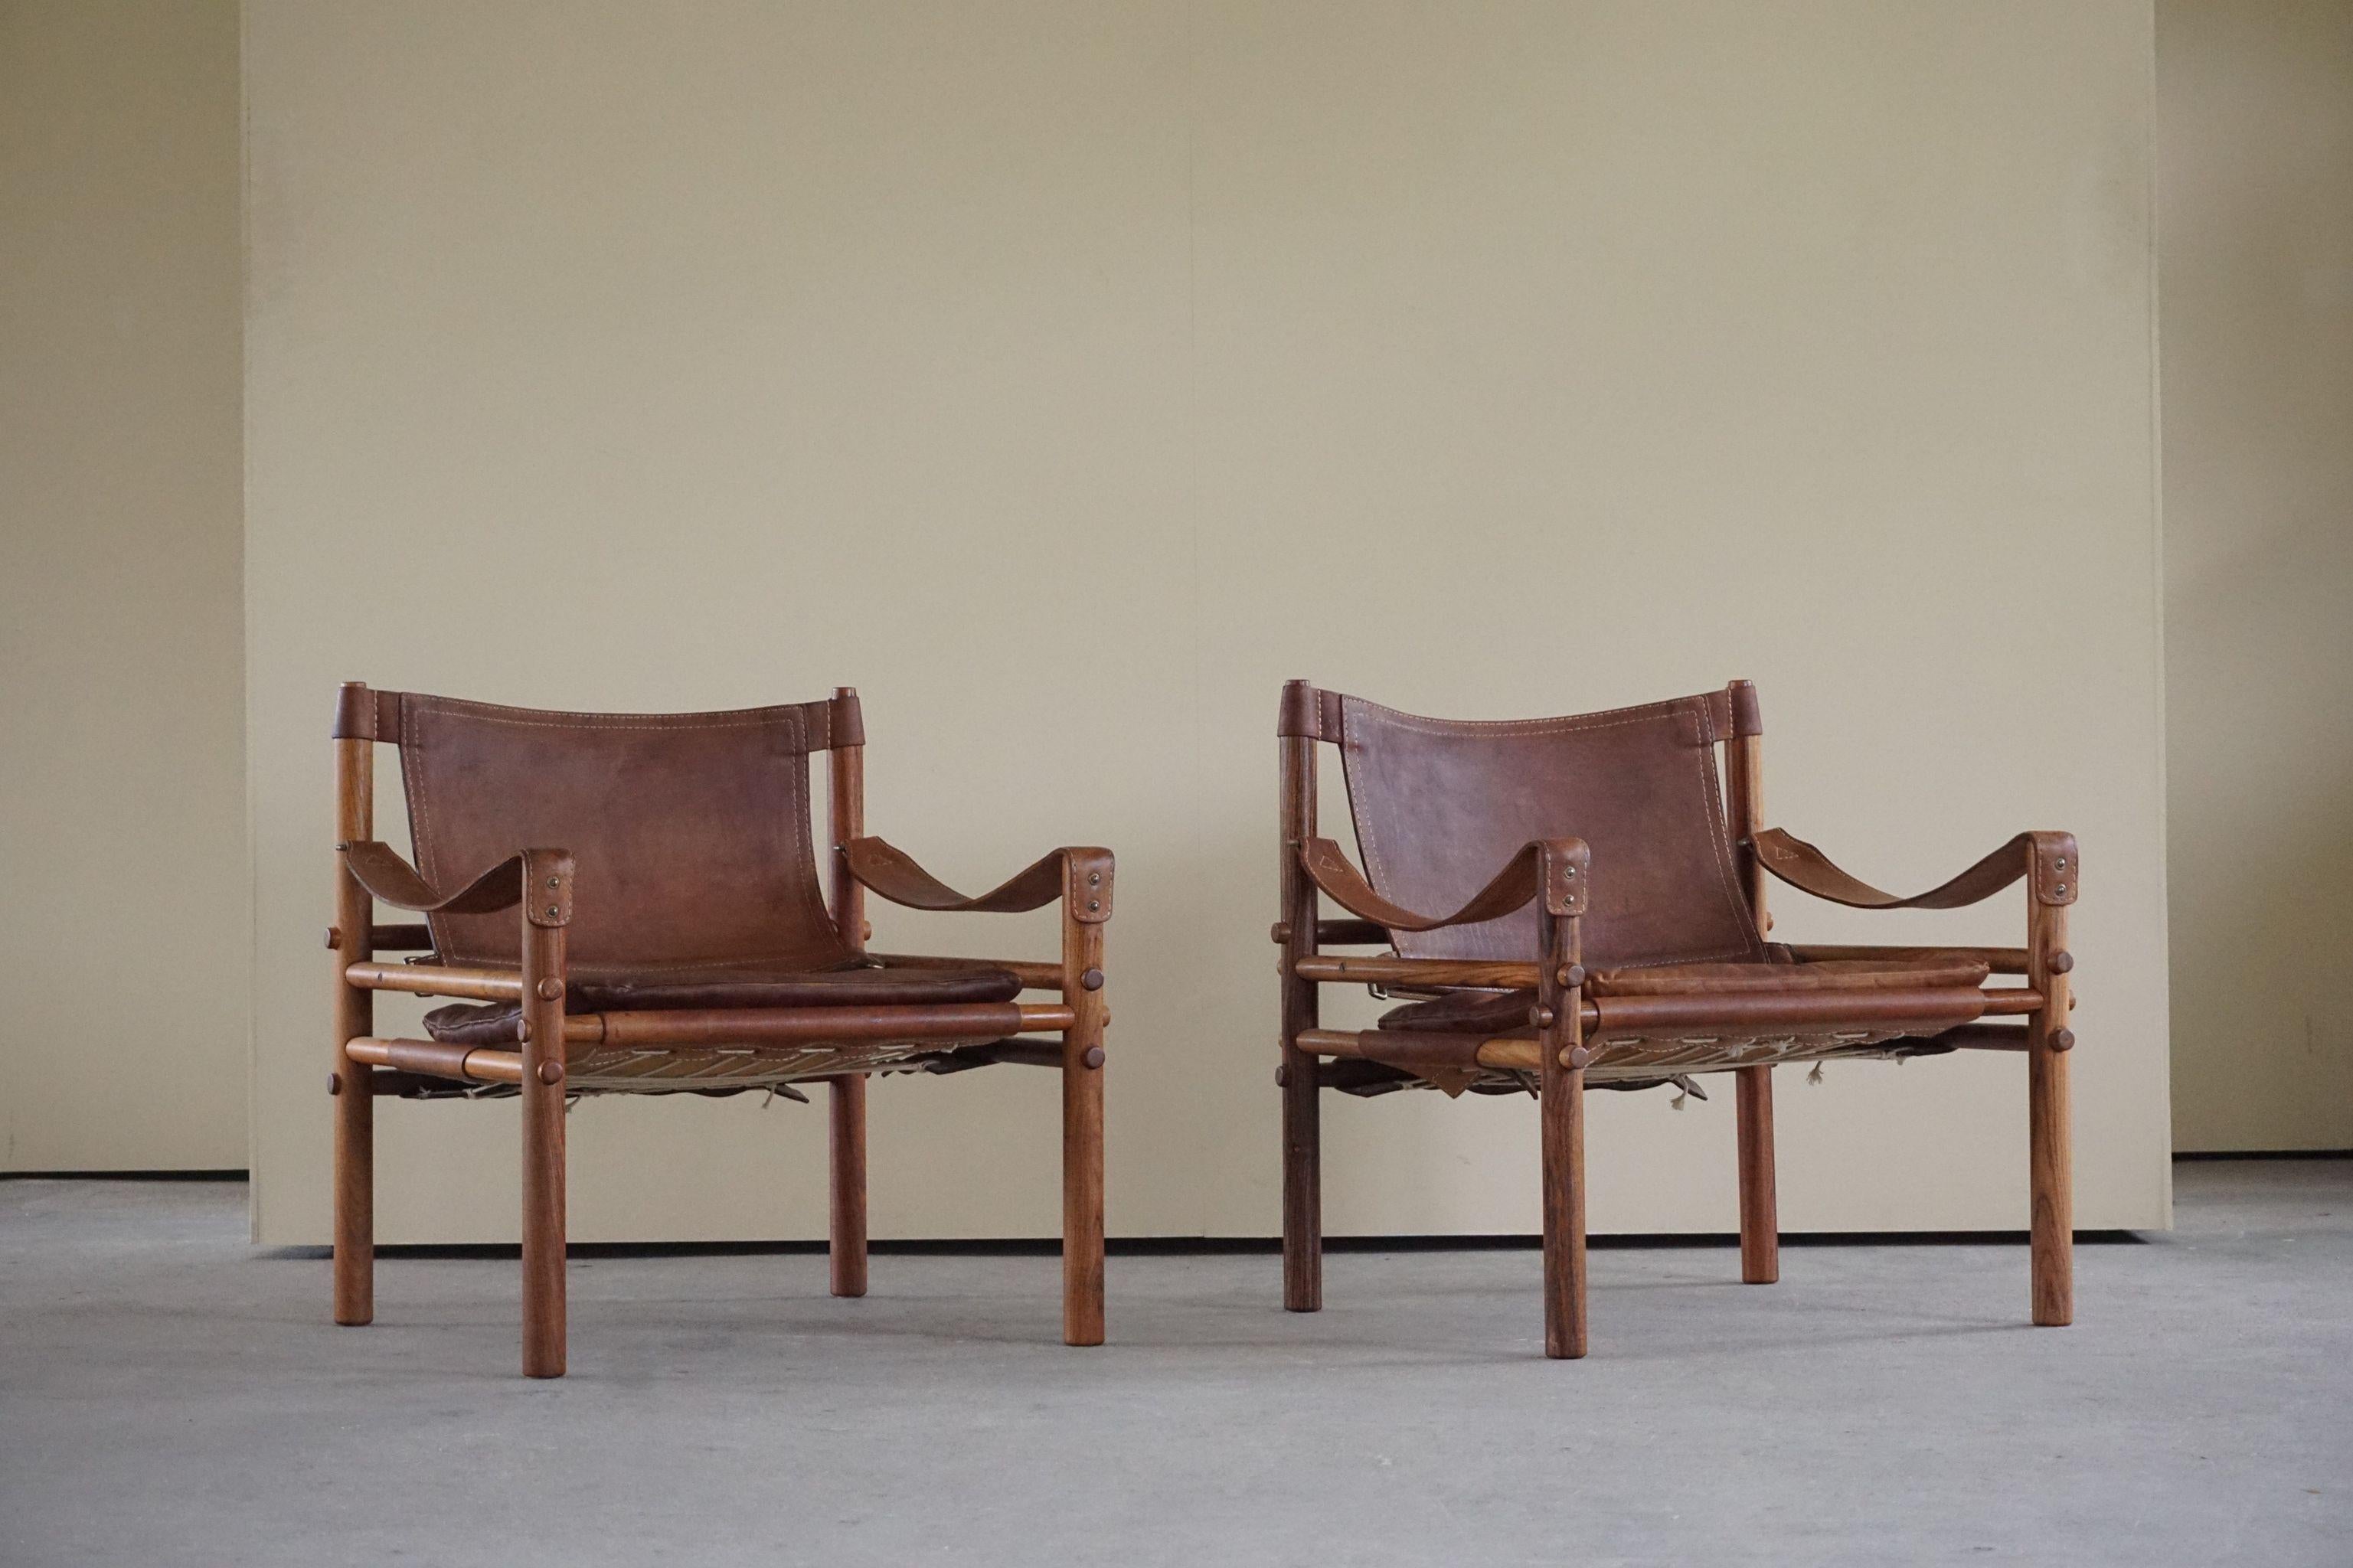 Leather Pair of Sirocco Safari Chairs, Made by Arne Norell AB in Aneby Sweden, 1960s